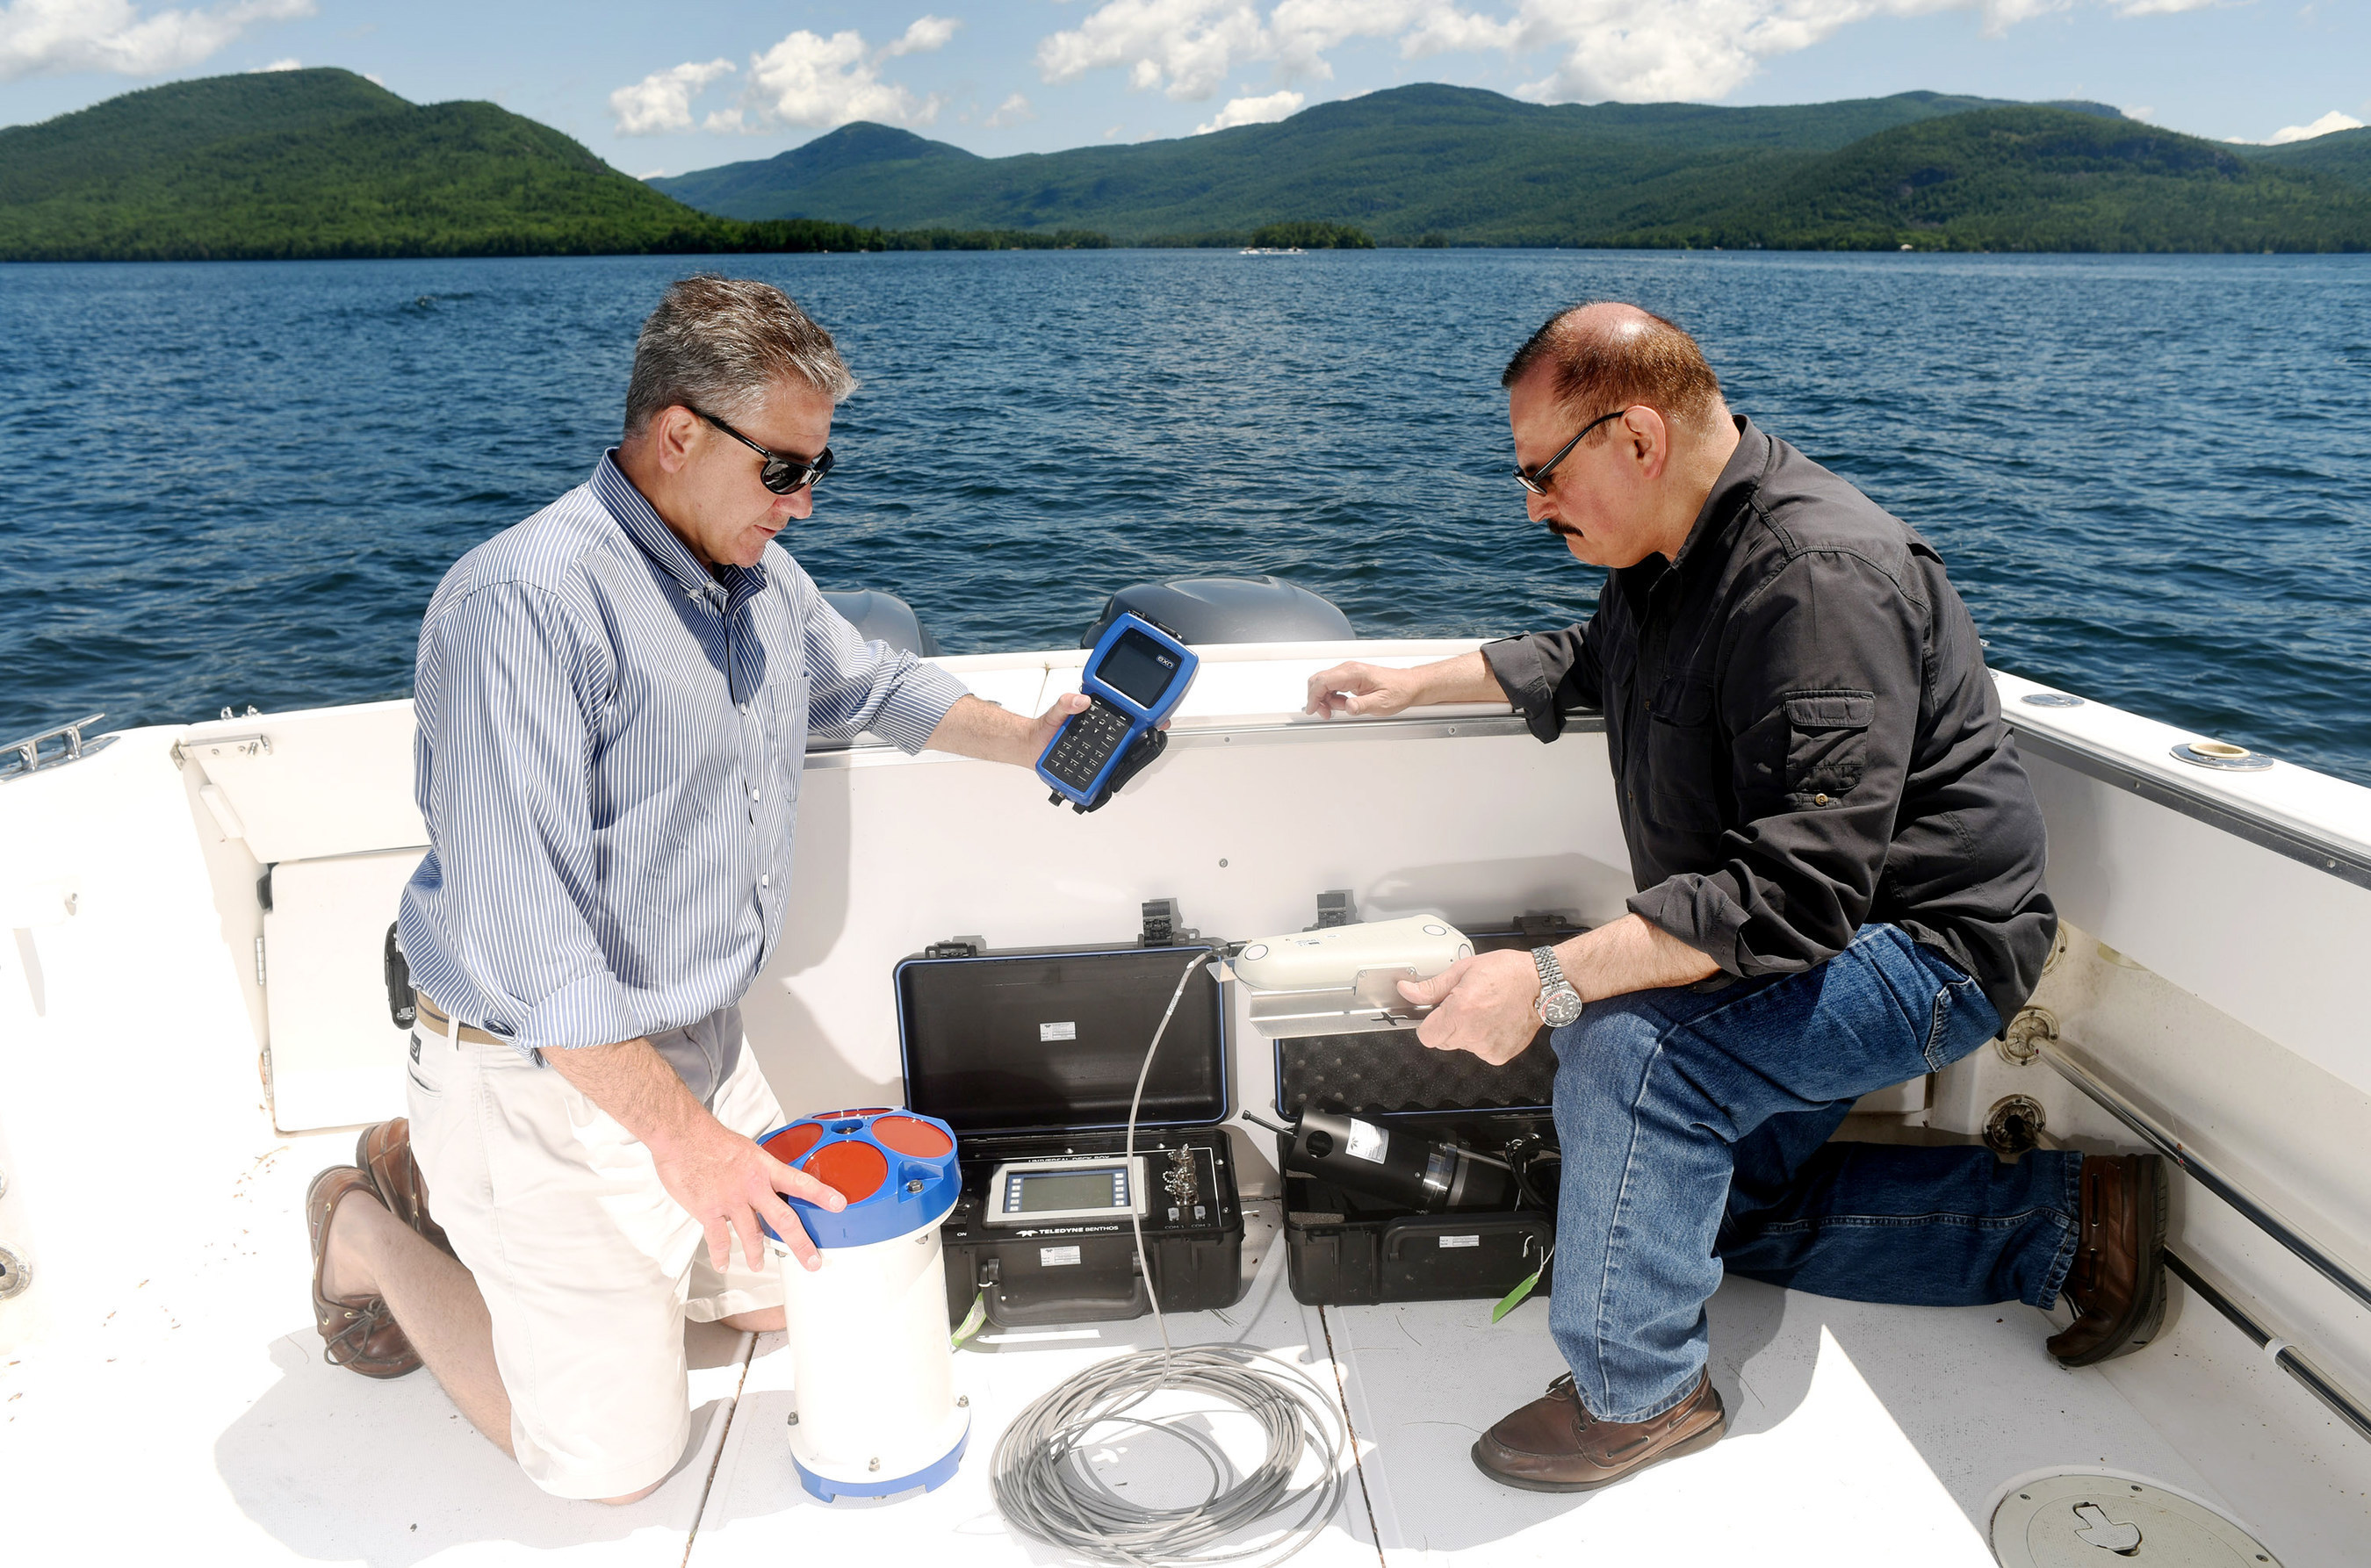 IBM Research scientists Mike Kelly (left) and Harry Kolar (right) deploy an array of sensors that capture data which will be analyzed to help manage and protect New York's Lake George. Their efforts are in support of The Jefferson Project at Lake George, a three year research initiative to deploy Internet of Things technology to create the "world's smartest lake." (Feature Photo for IBM)